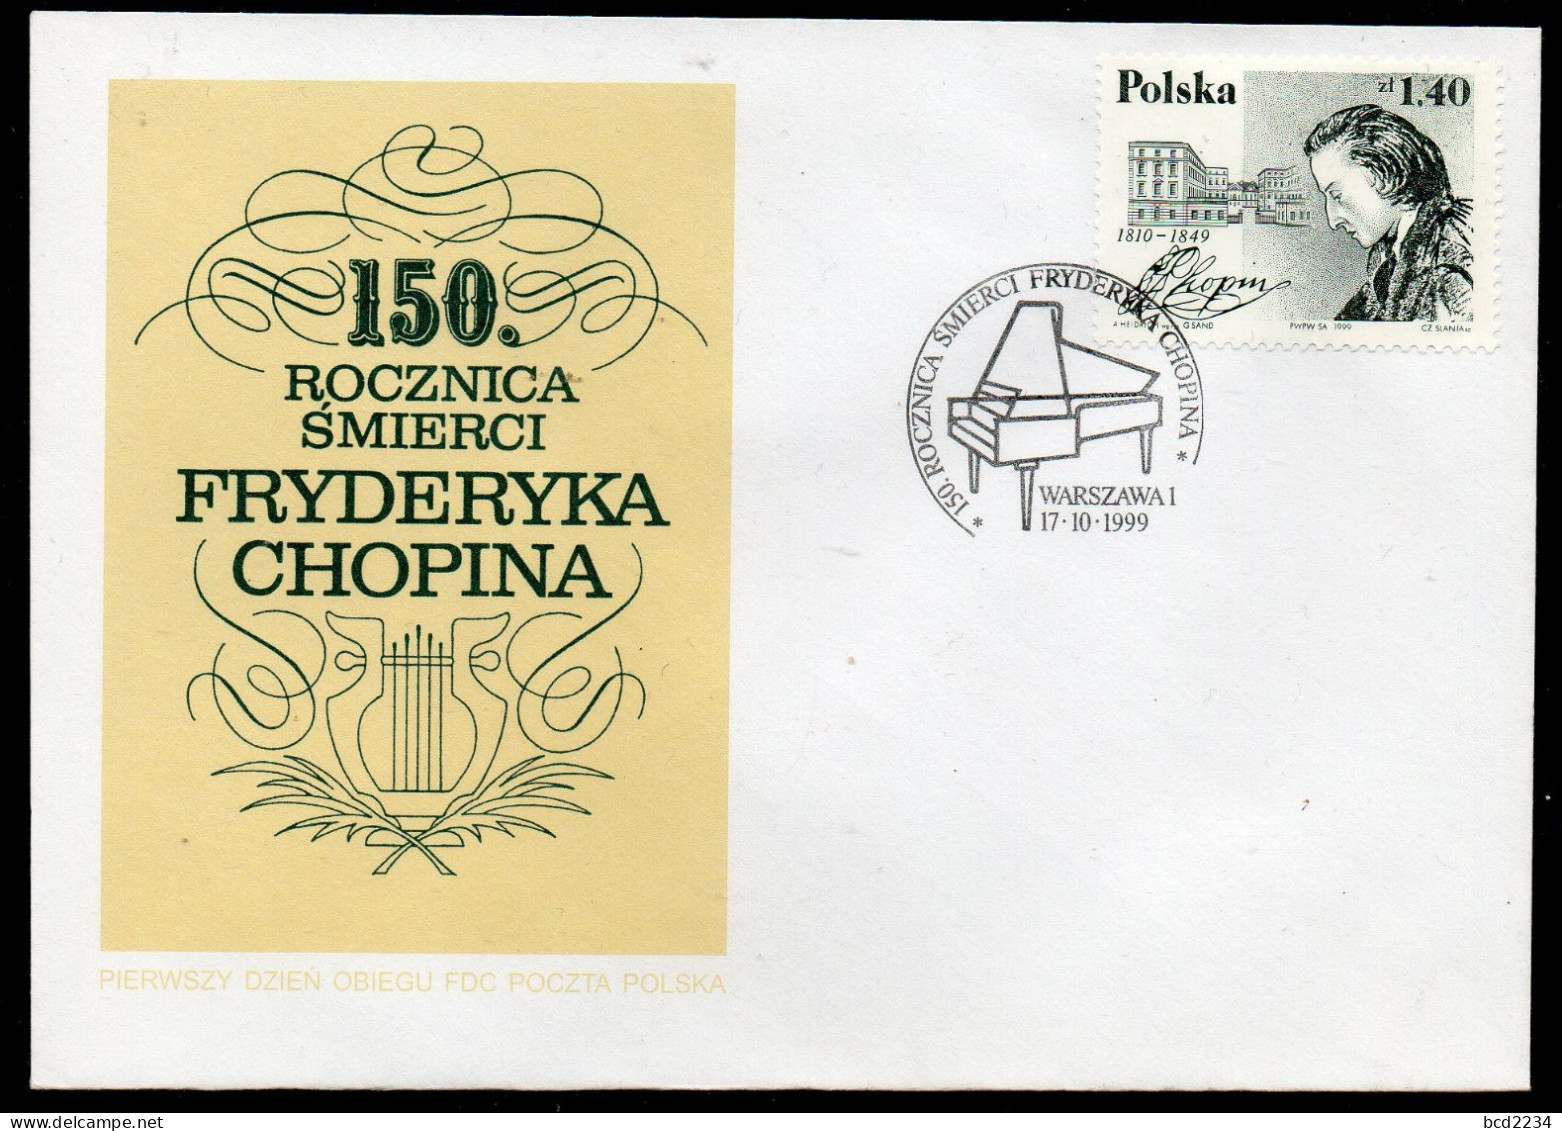 POLAND FRANCE SLANIA 1999 CHOPIN JOINT ISSUE FDC 150TH DEATH ANNIVERSARY COMPOSERS MUSIC PIANO POLISH FRENCH - Music